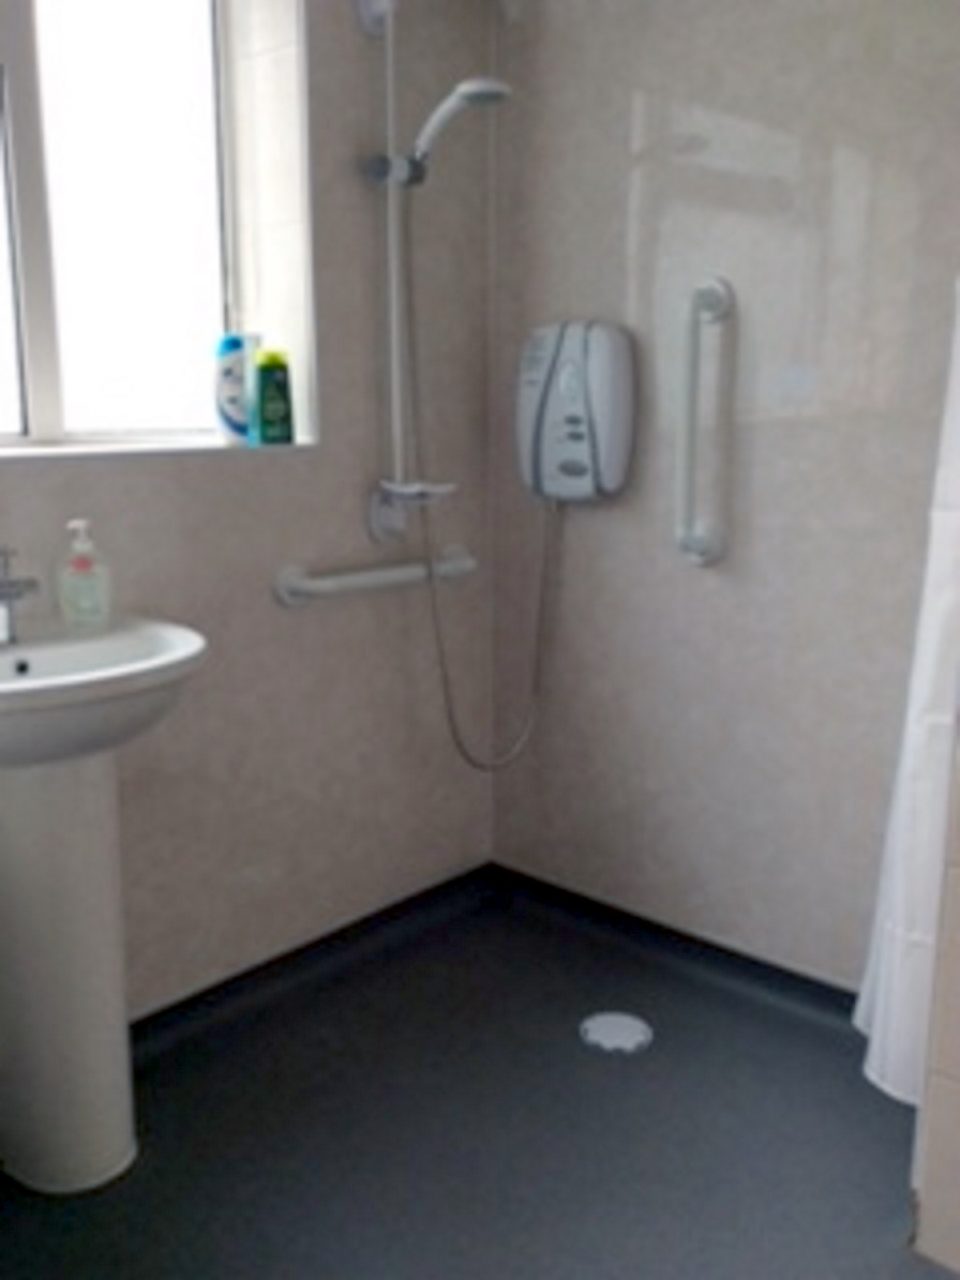 Wetroom Installers in Tamworth and The Midlands